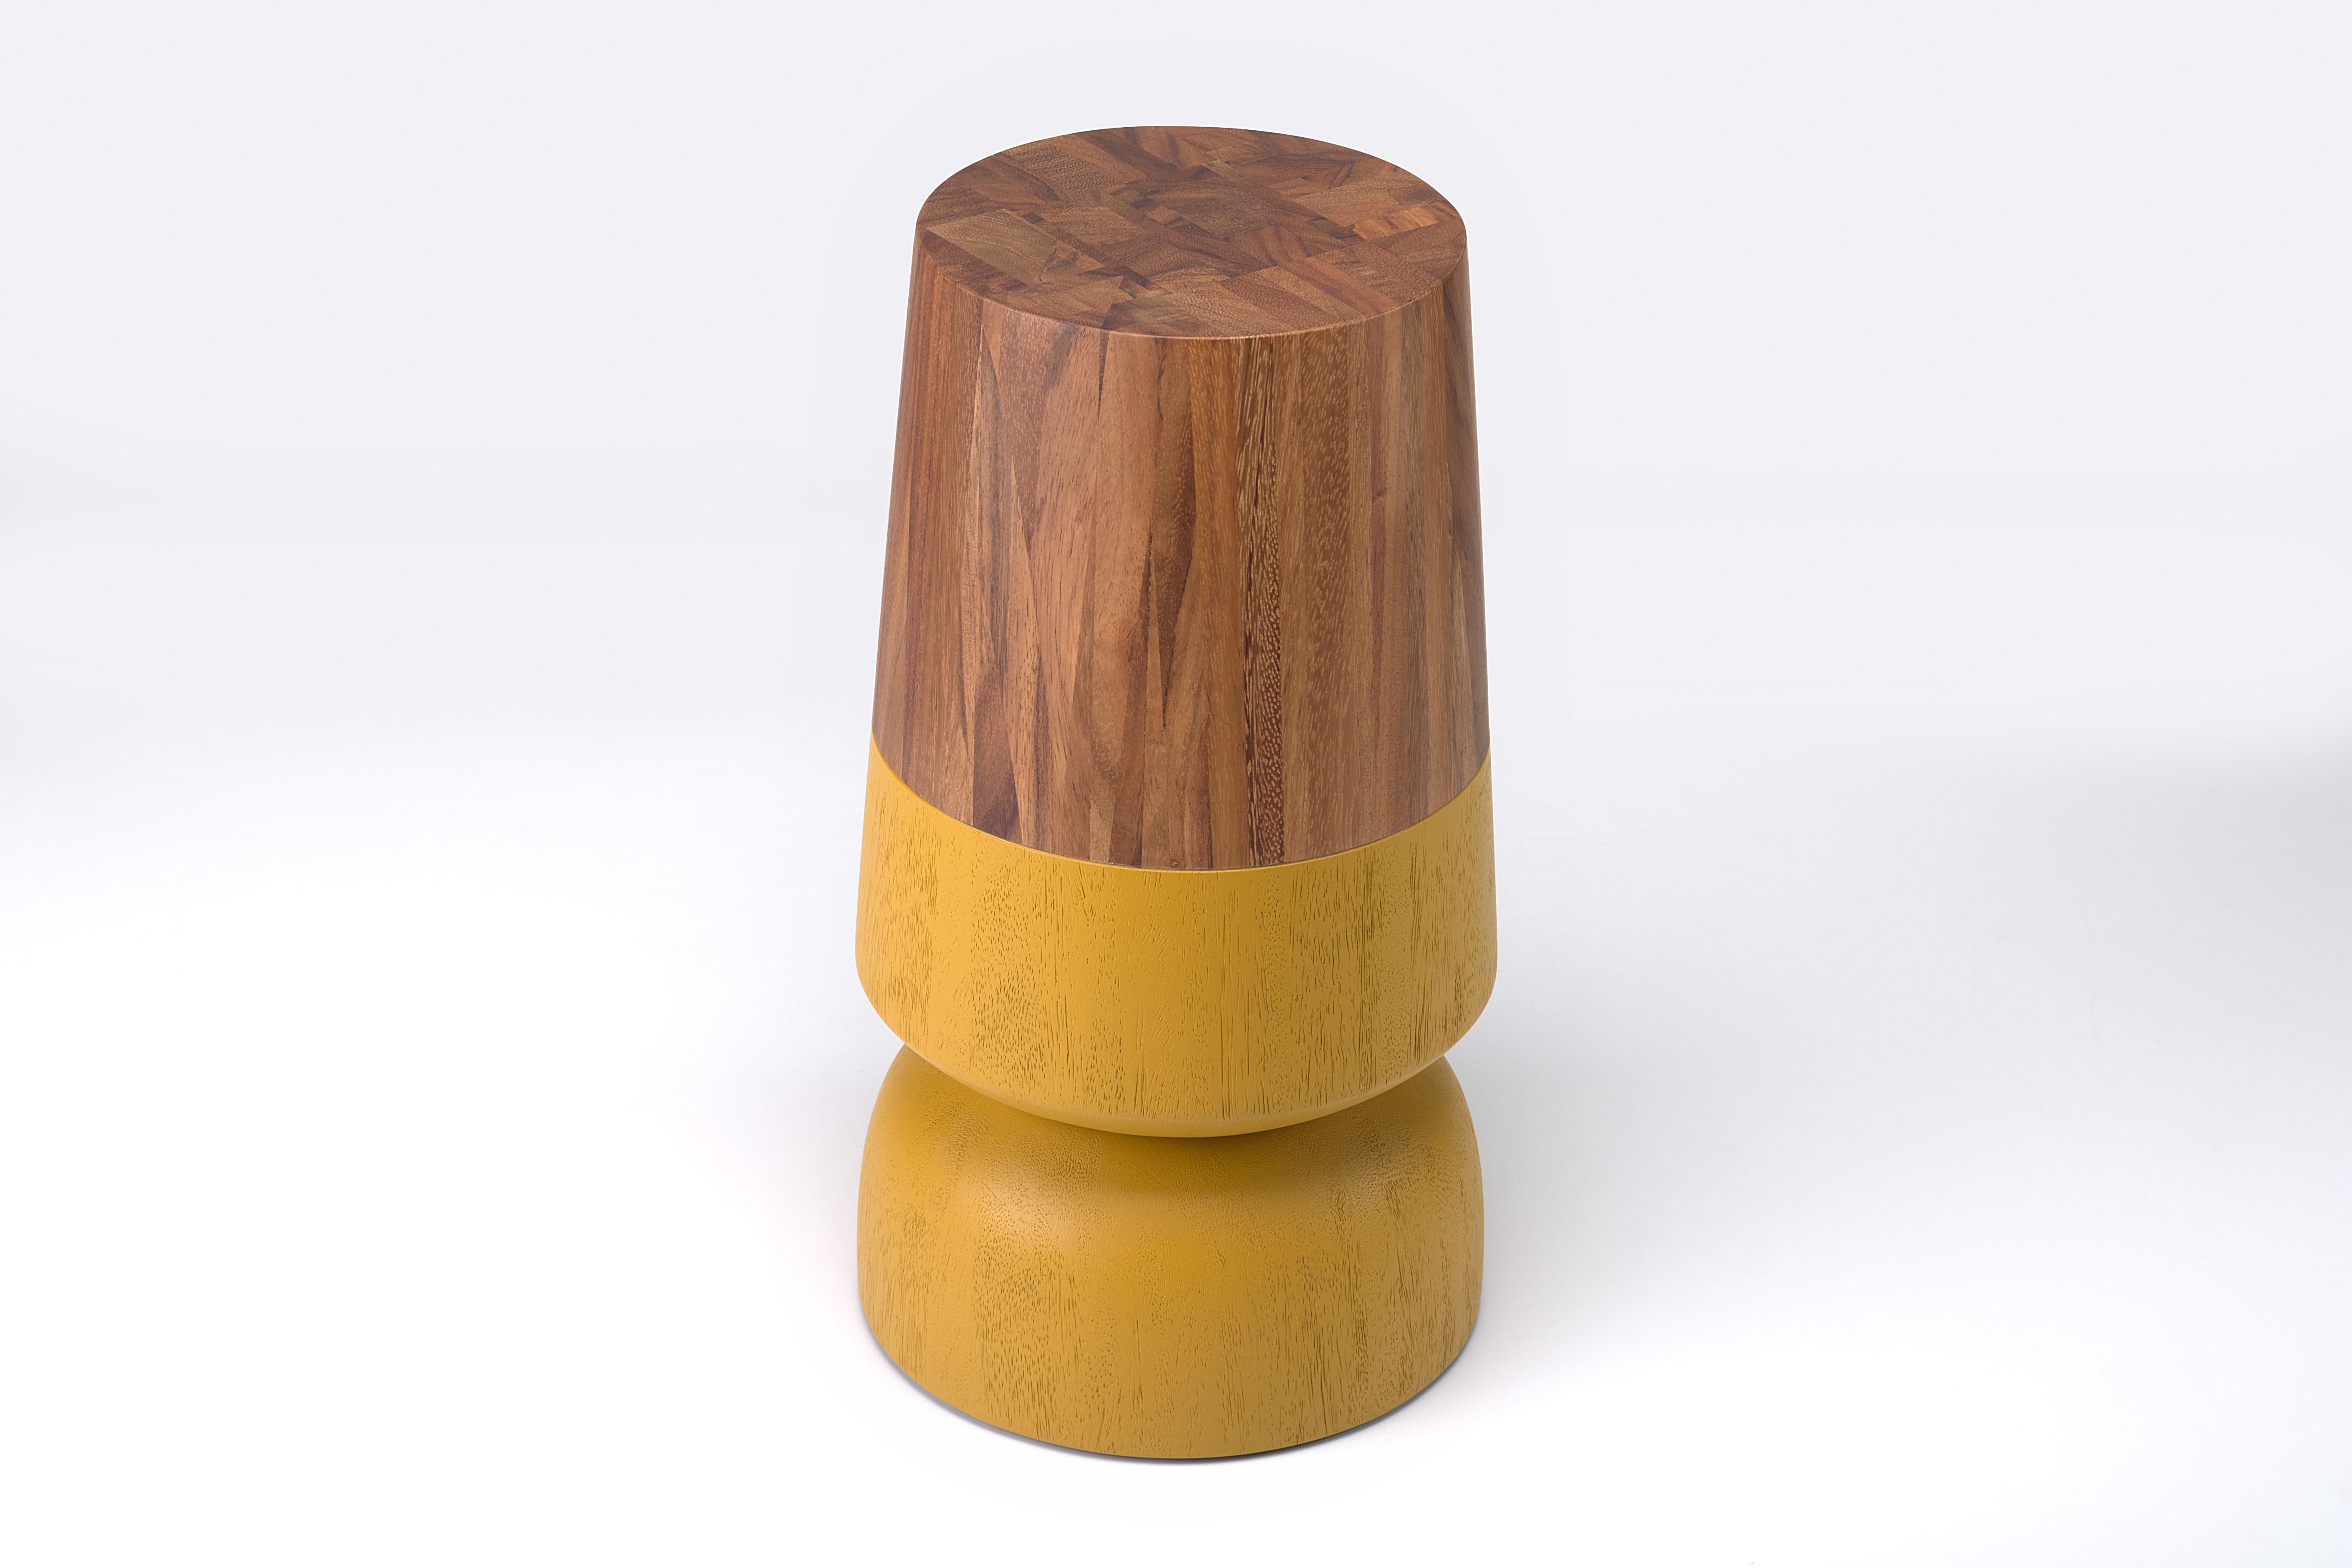 Solid wood turned side table made out of solid conacaste and brushed mustard accents

The capirucho side table and stool are inspired by a popular yet simple toy enjoyed for many generations by kids in Guatemala. The piece has a playful silhouette